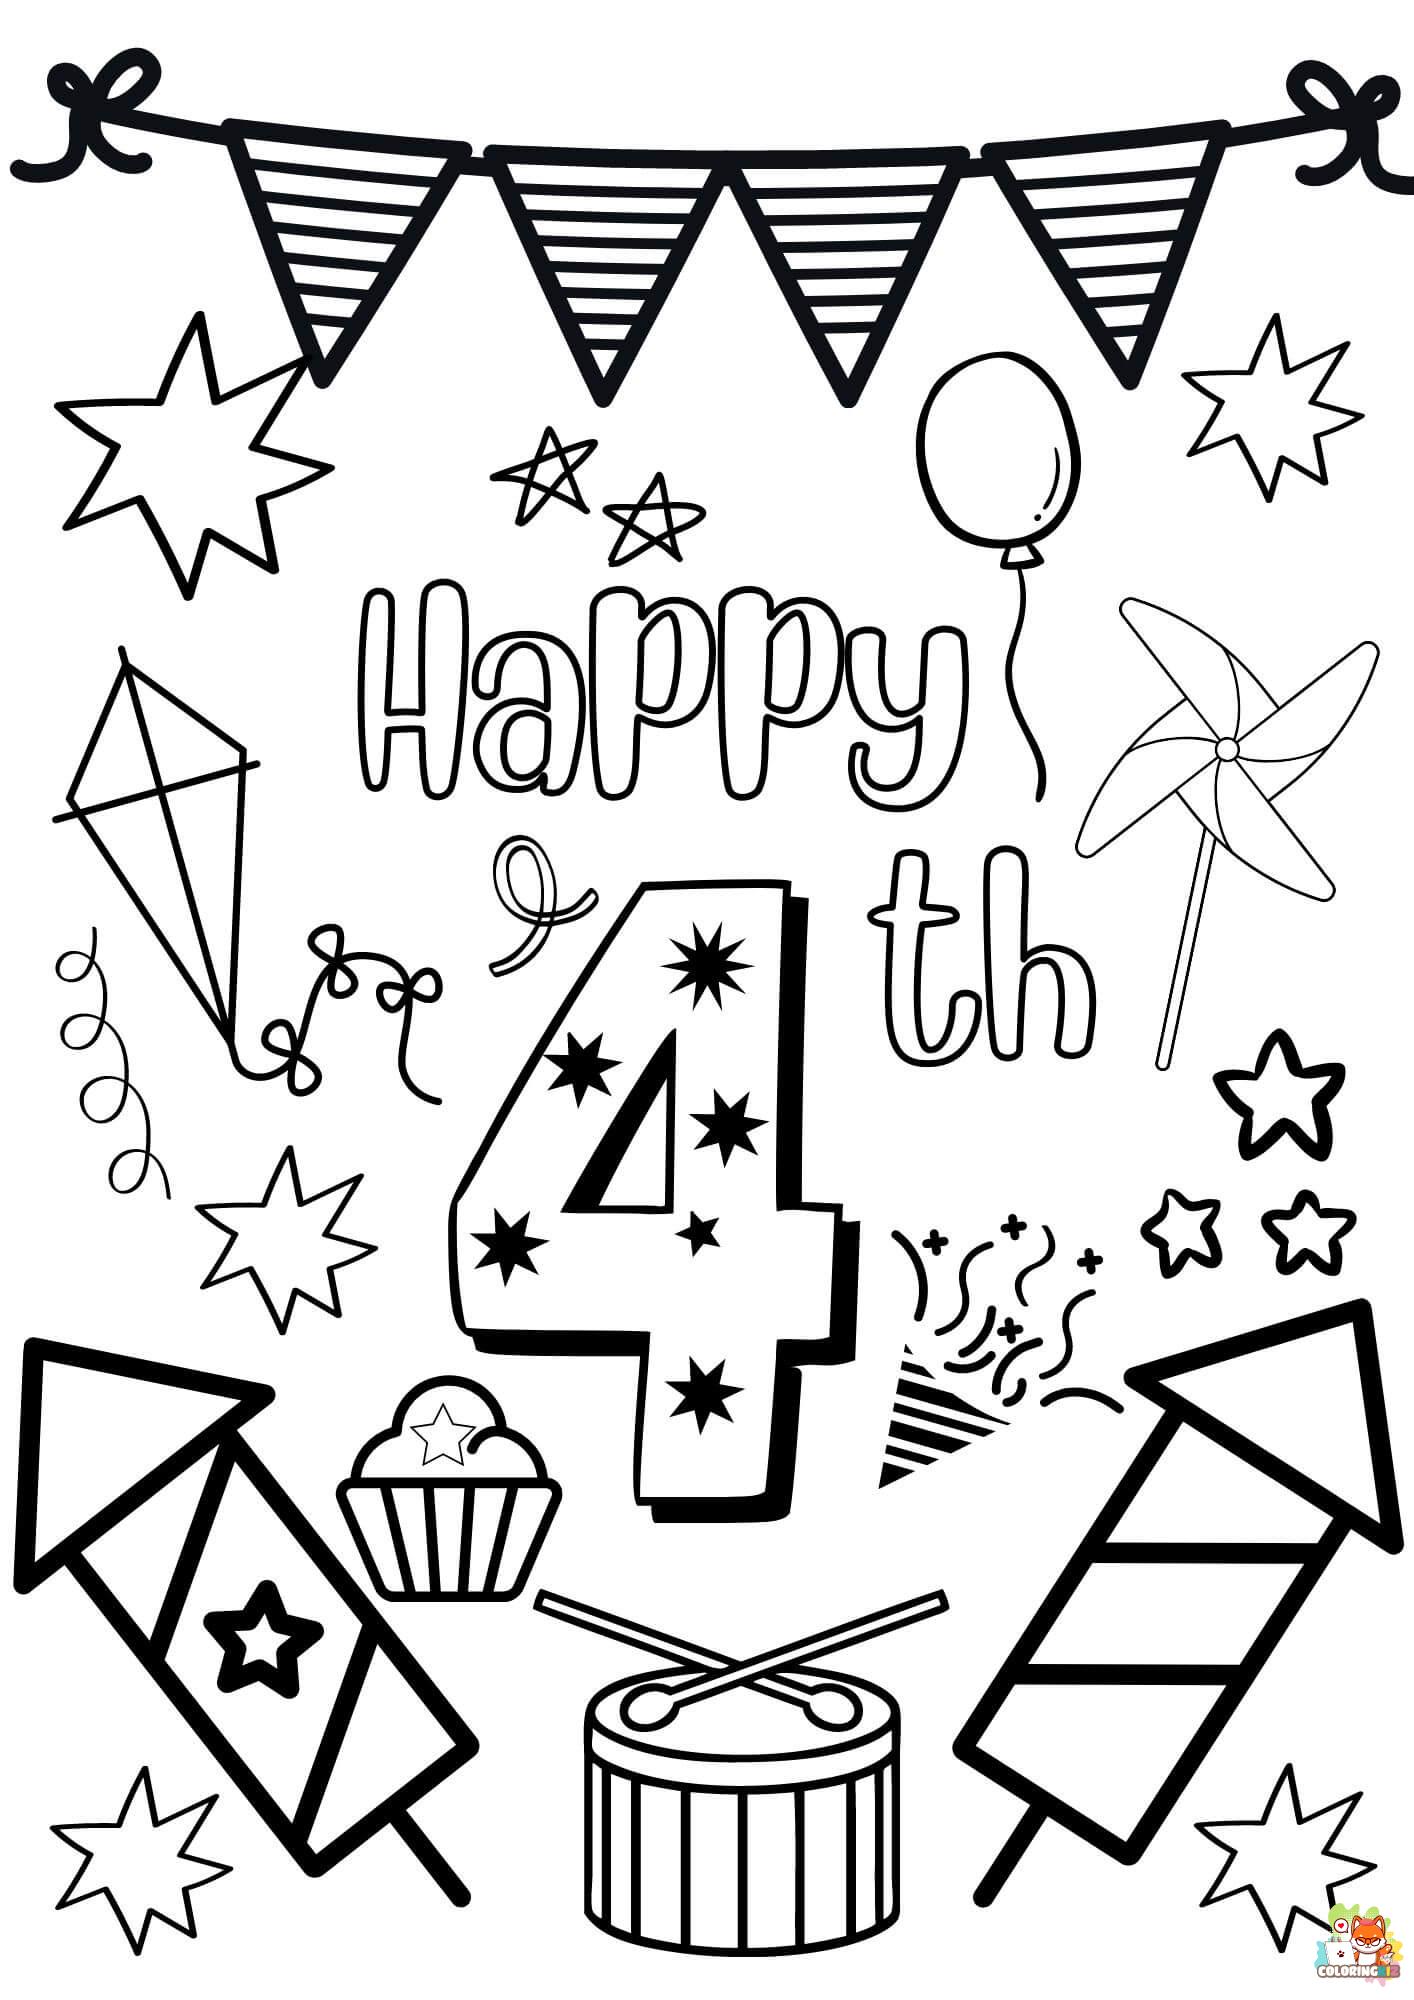 Happy 4th of July coloring pages printable free